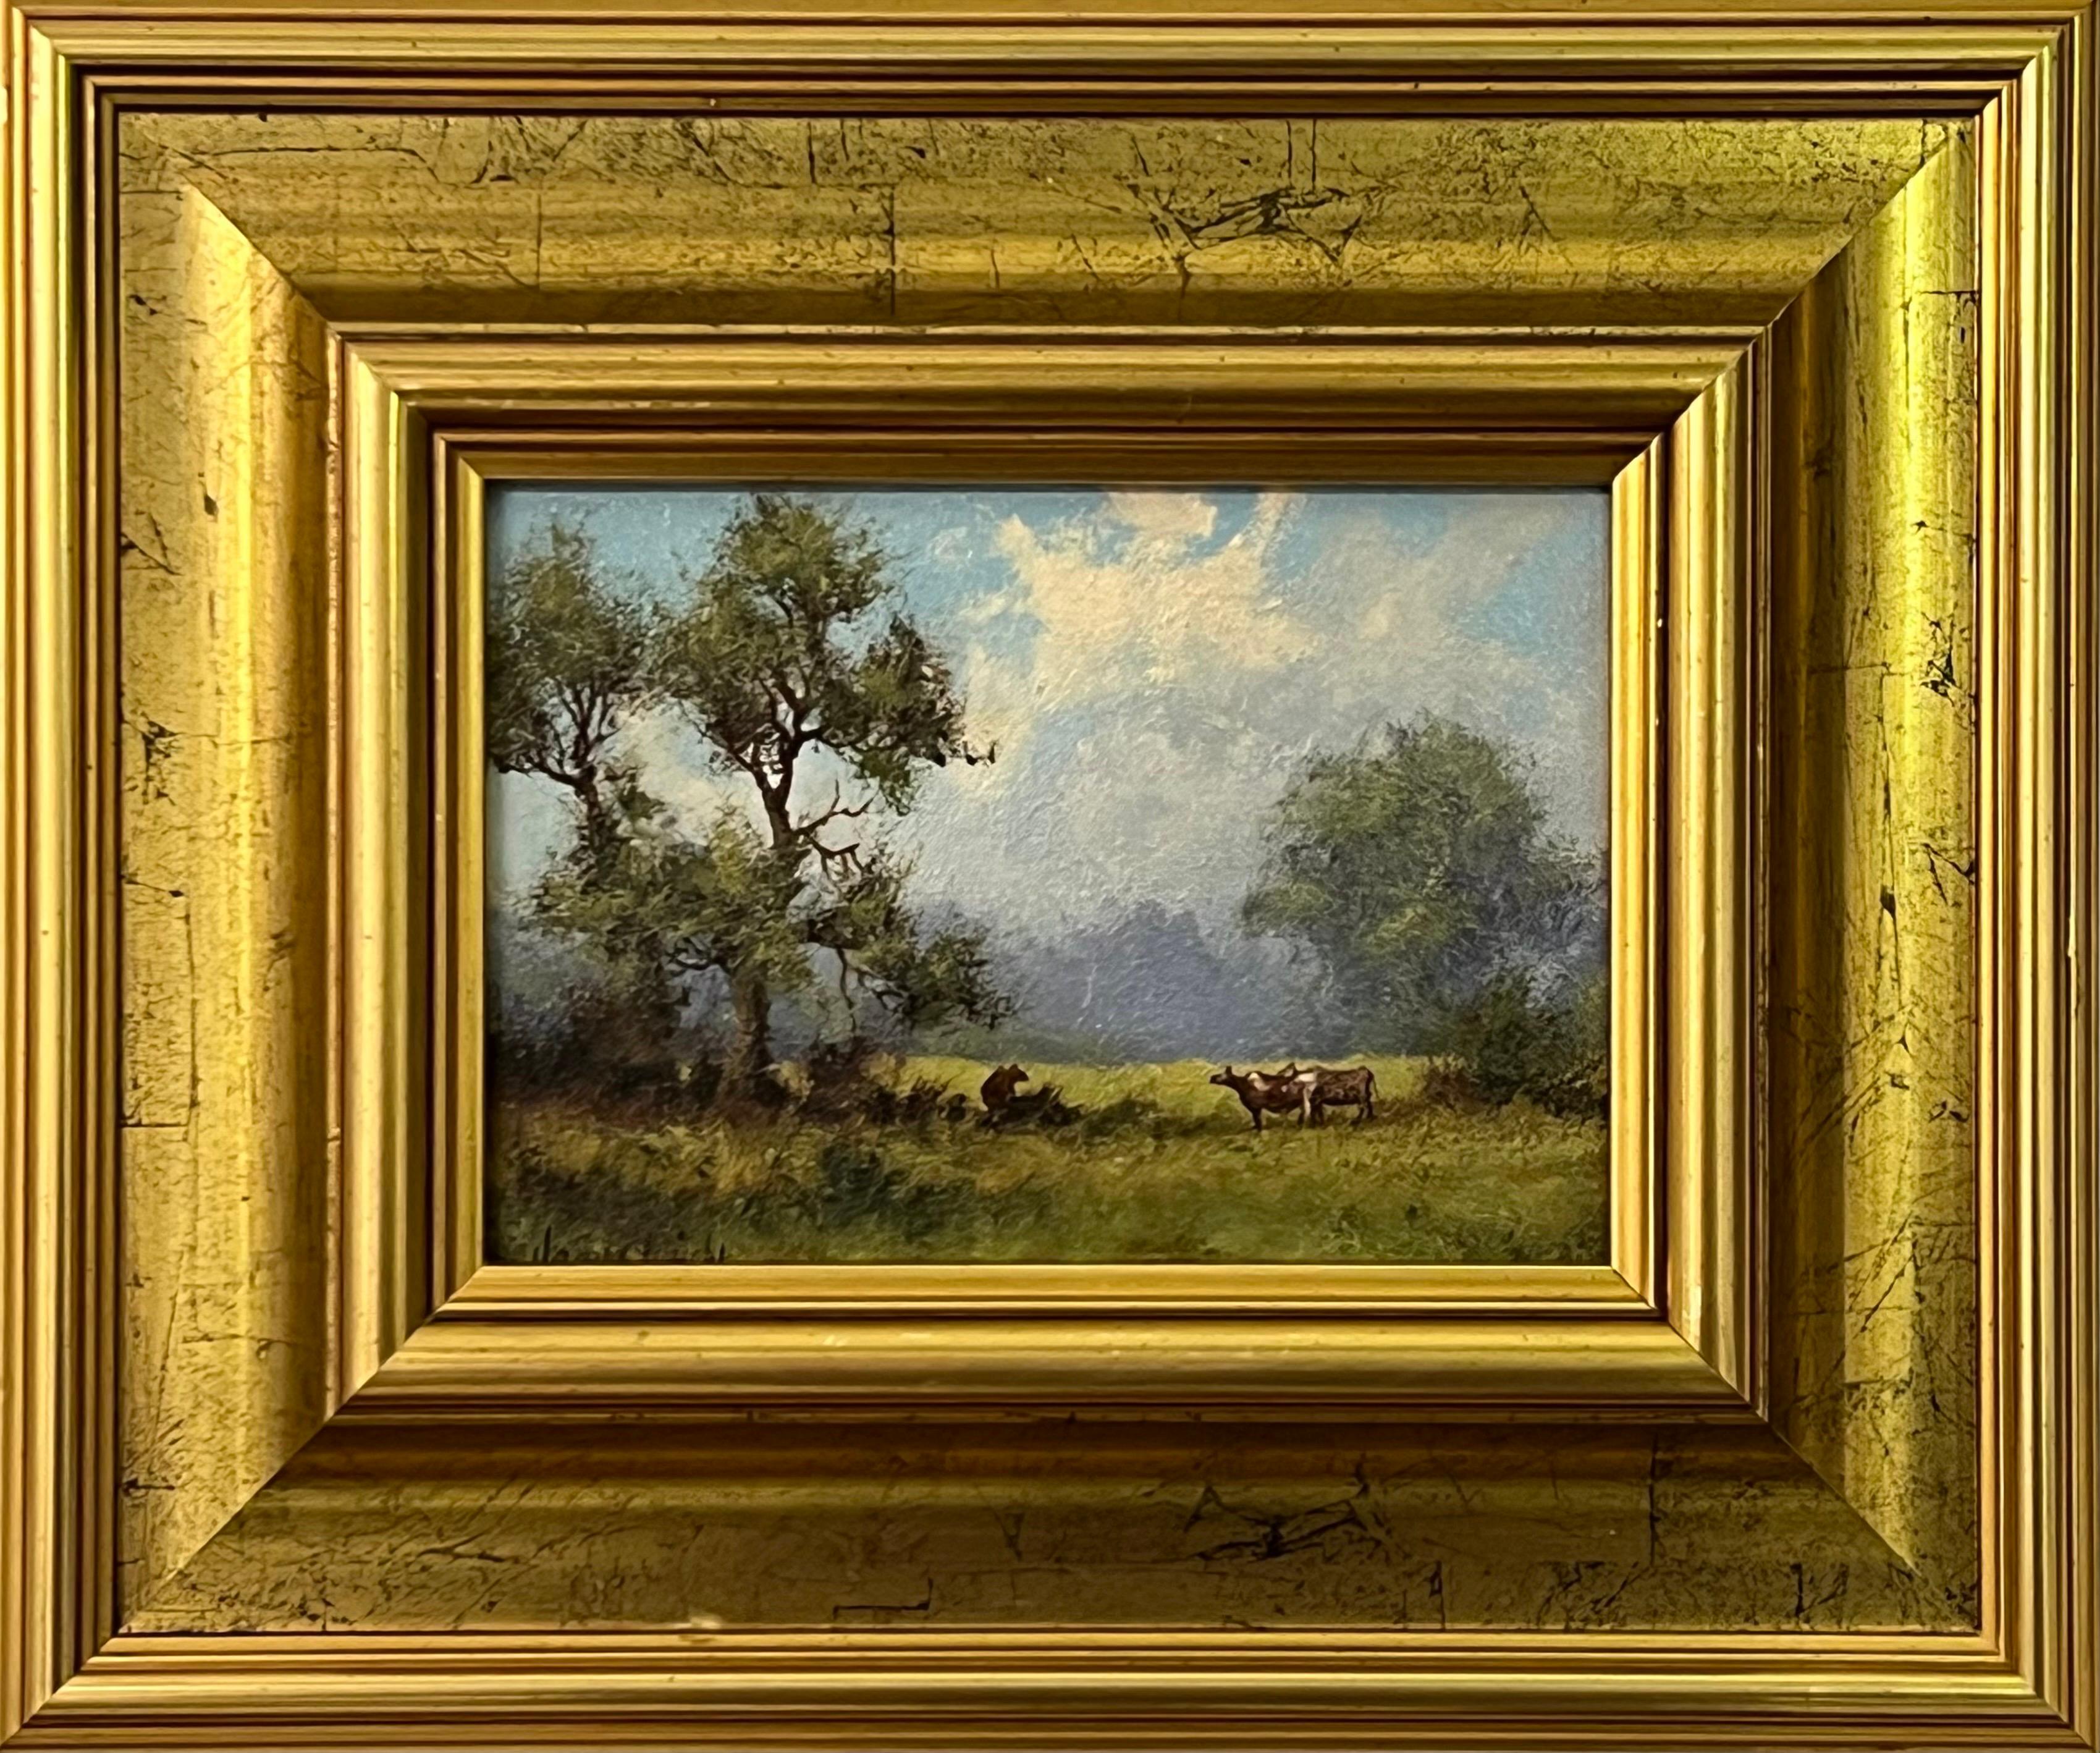 James Wright Animal Painting - Landscape with Cattle Grazing in the English Countryside by 20th Century Artist